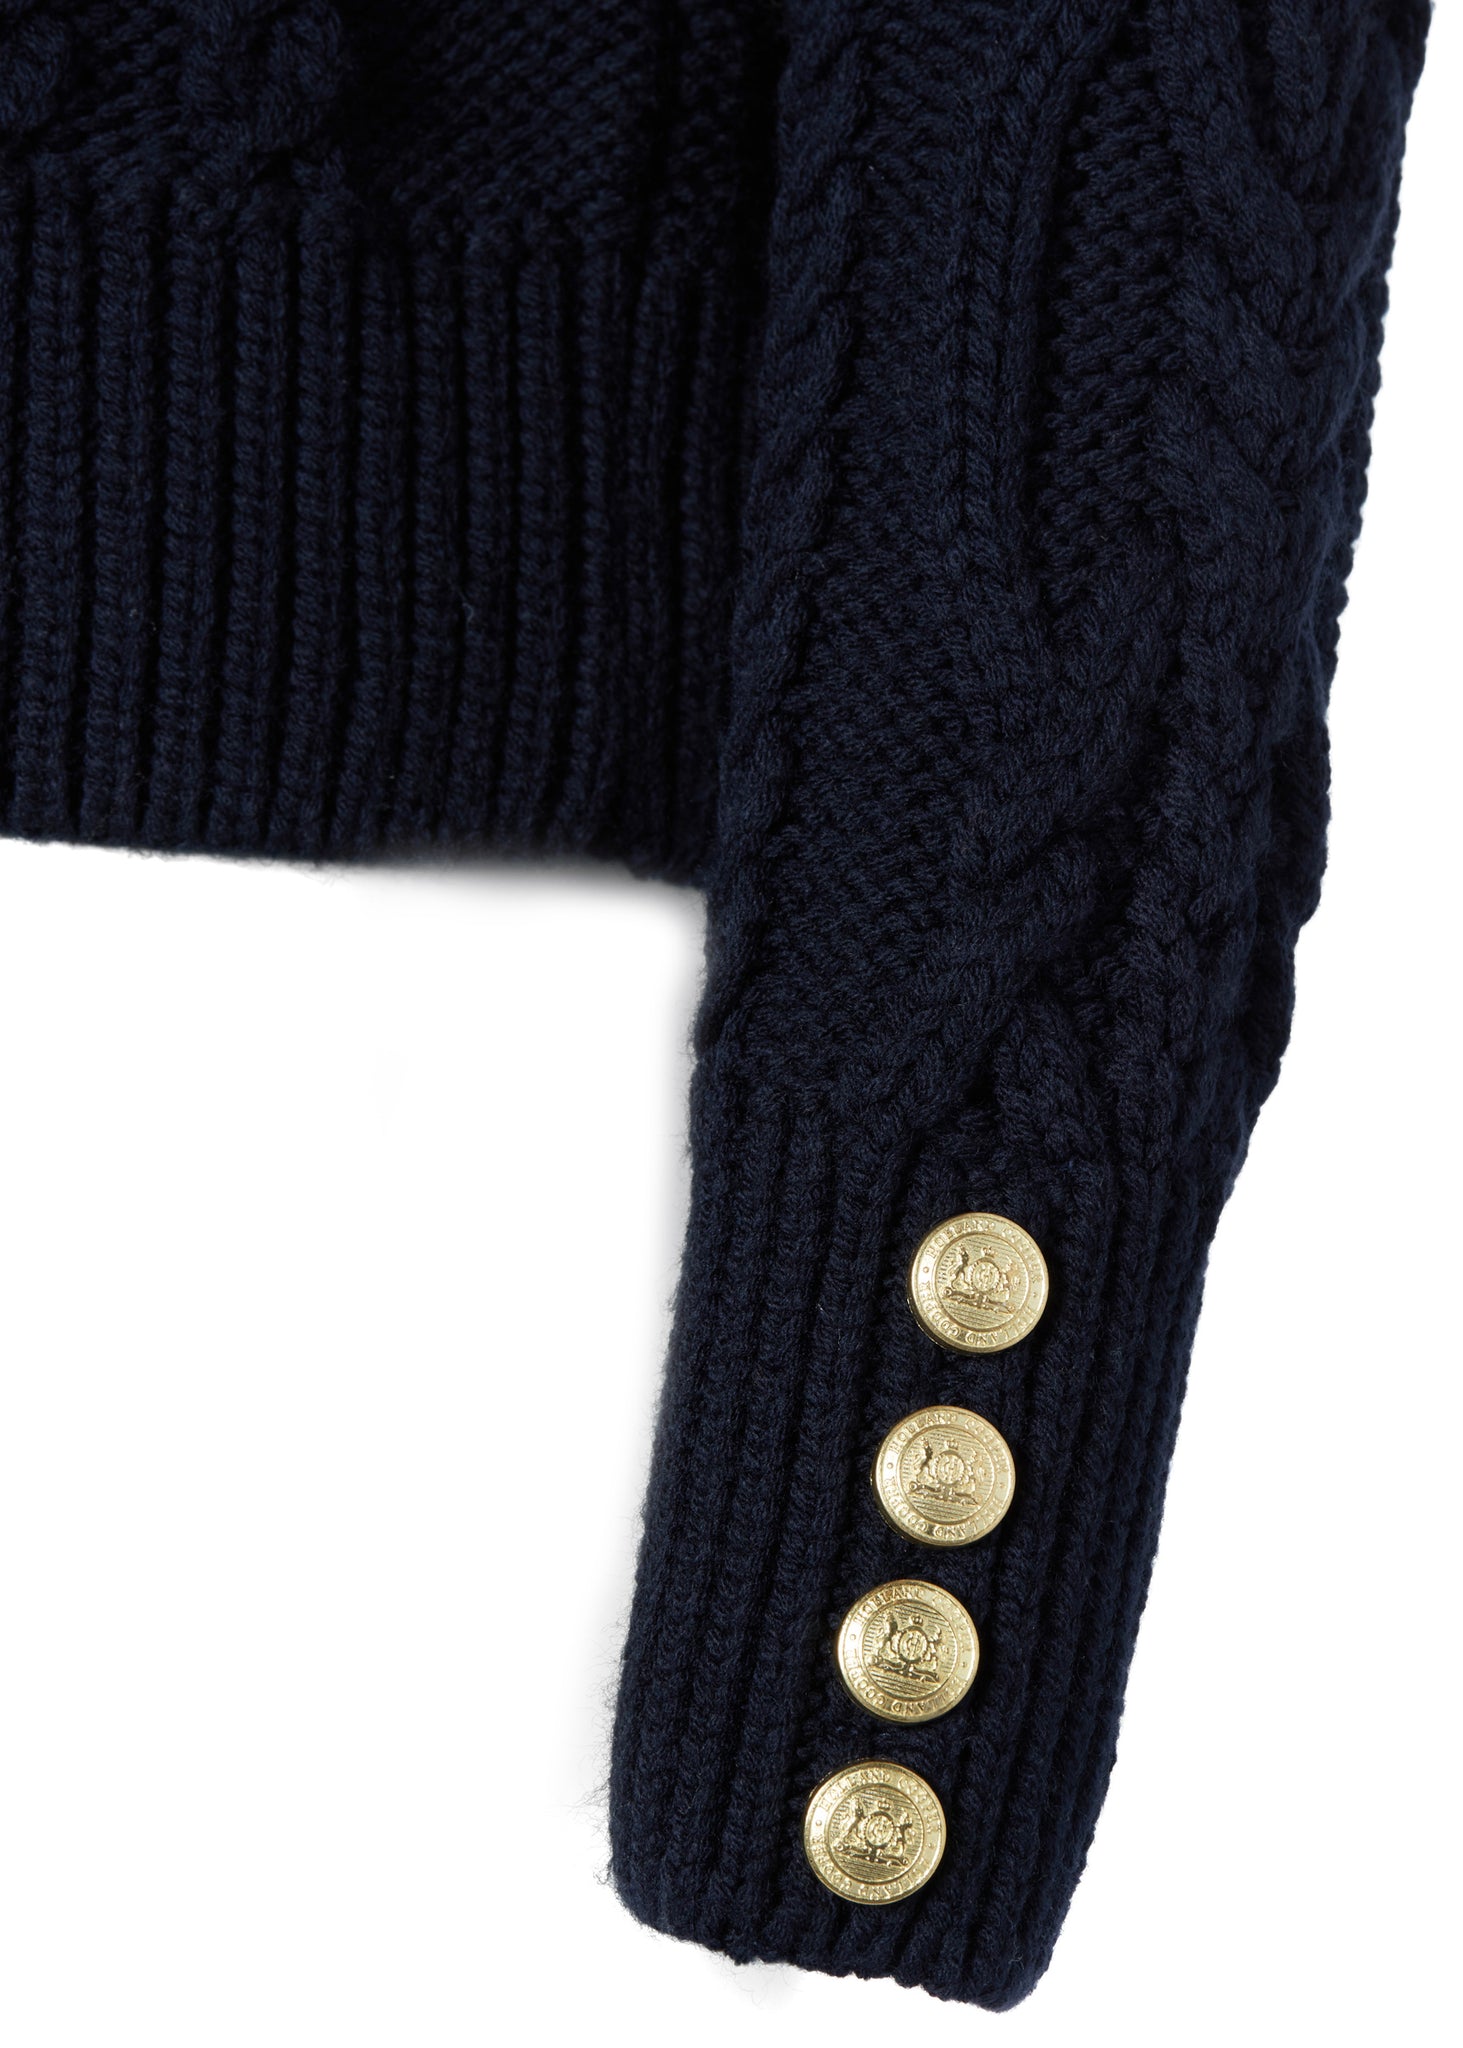 gold button detail on cuffs of a chunky cable knit roll neck jumper in navy with dropped shoulders and thick ribbed cable trims and gold buttons on cuffs and collar